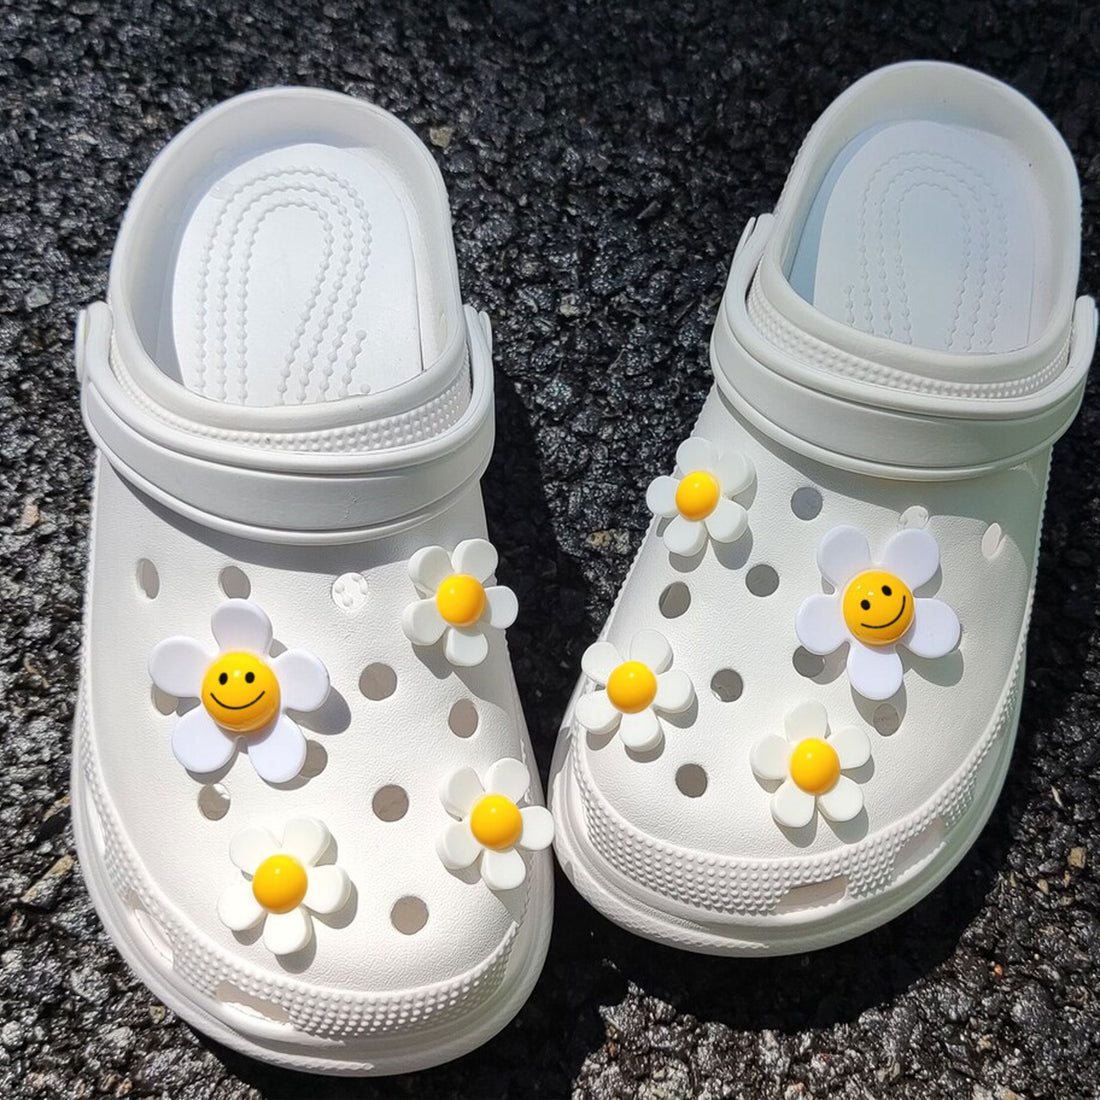 Acrylic Smiley Crocs Shoes Charms Decoration 1pack